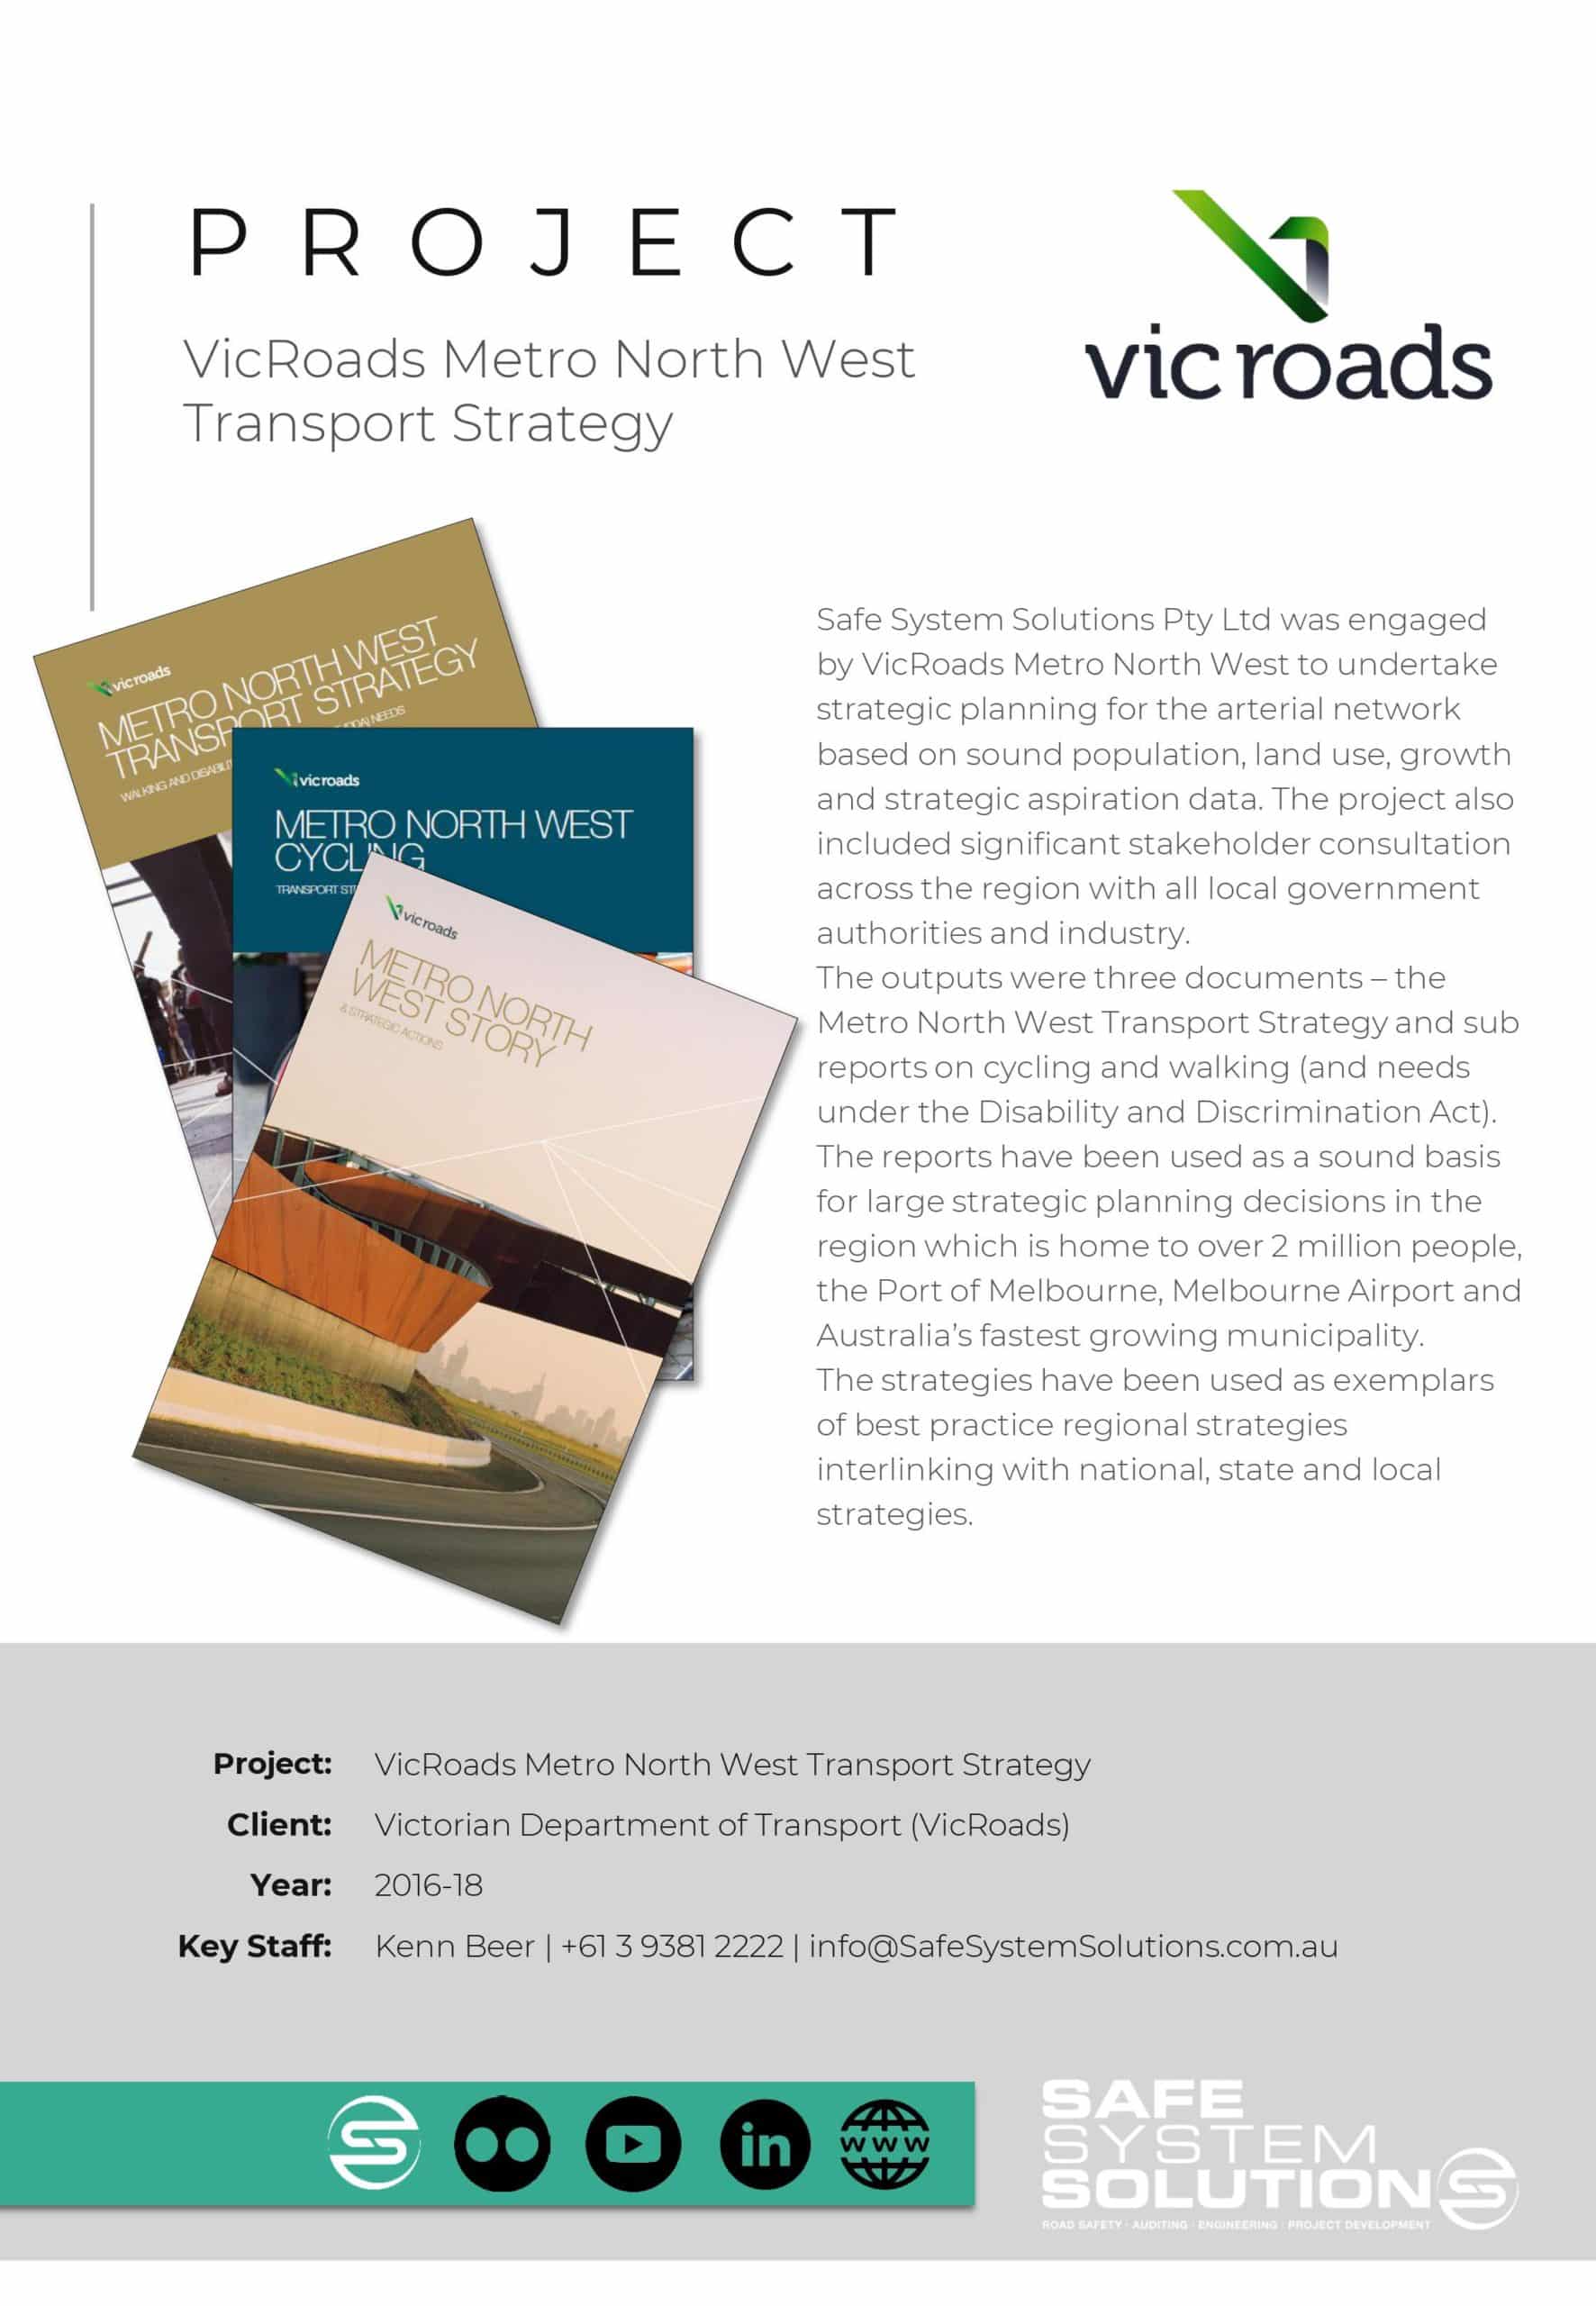 VicRoads Metro North West Transport Strategy